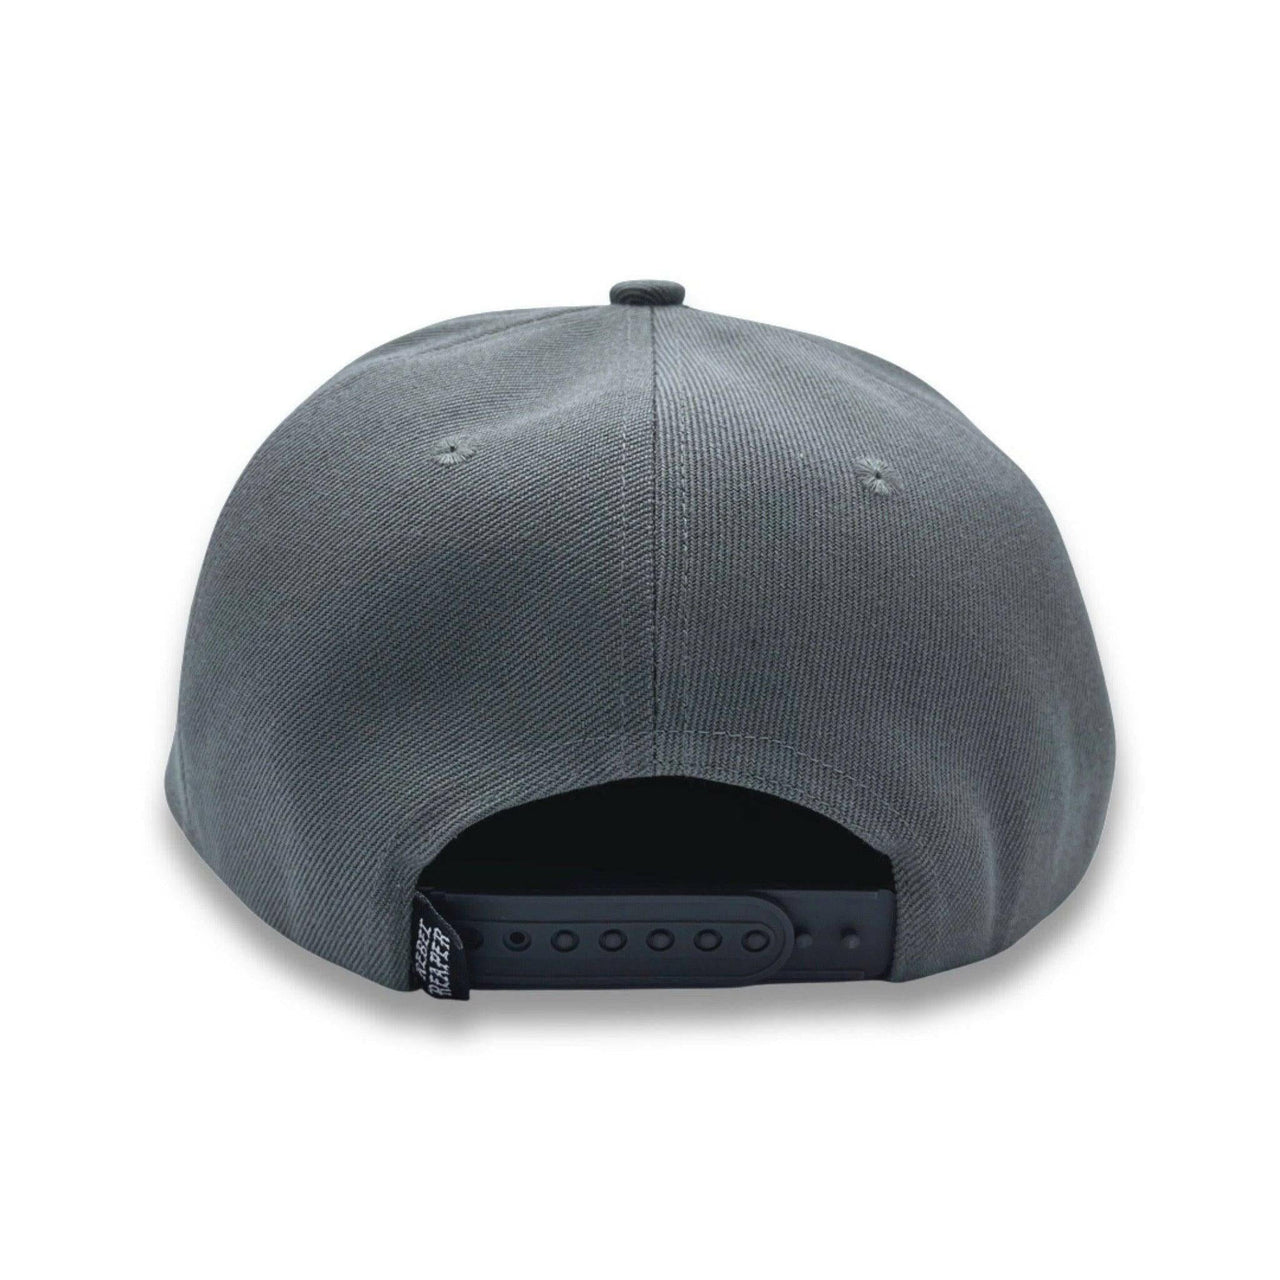 Grey Quality Goods Embroidered Snapback - Rebel Reaper Clothing Company Hats - Snapback